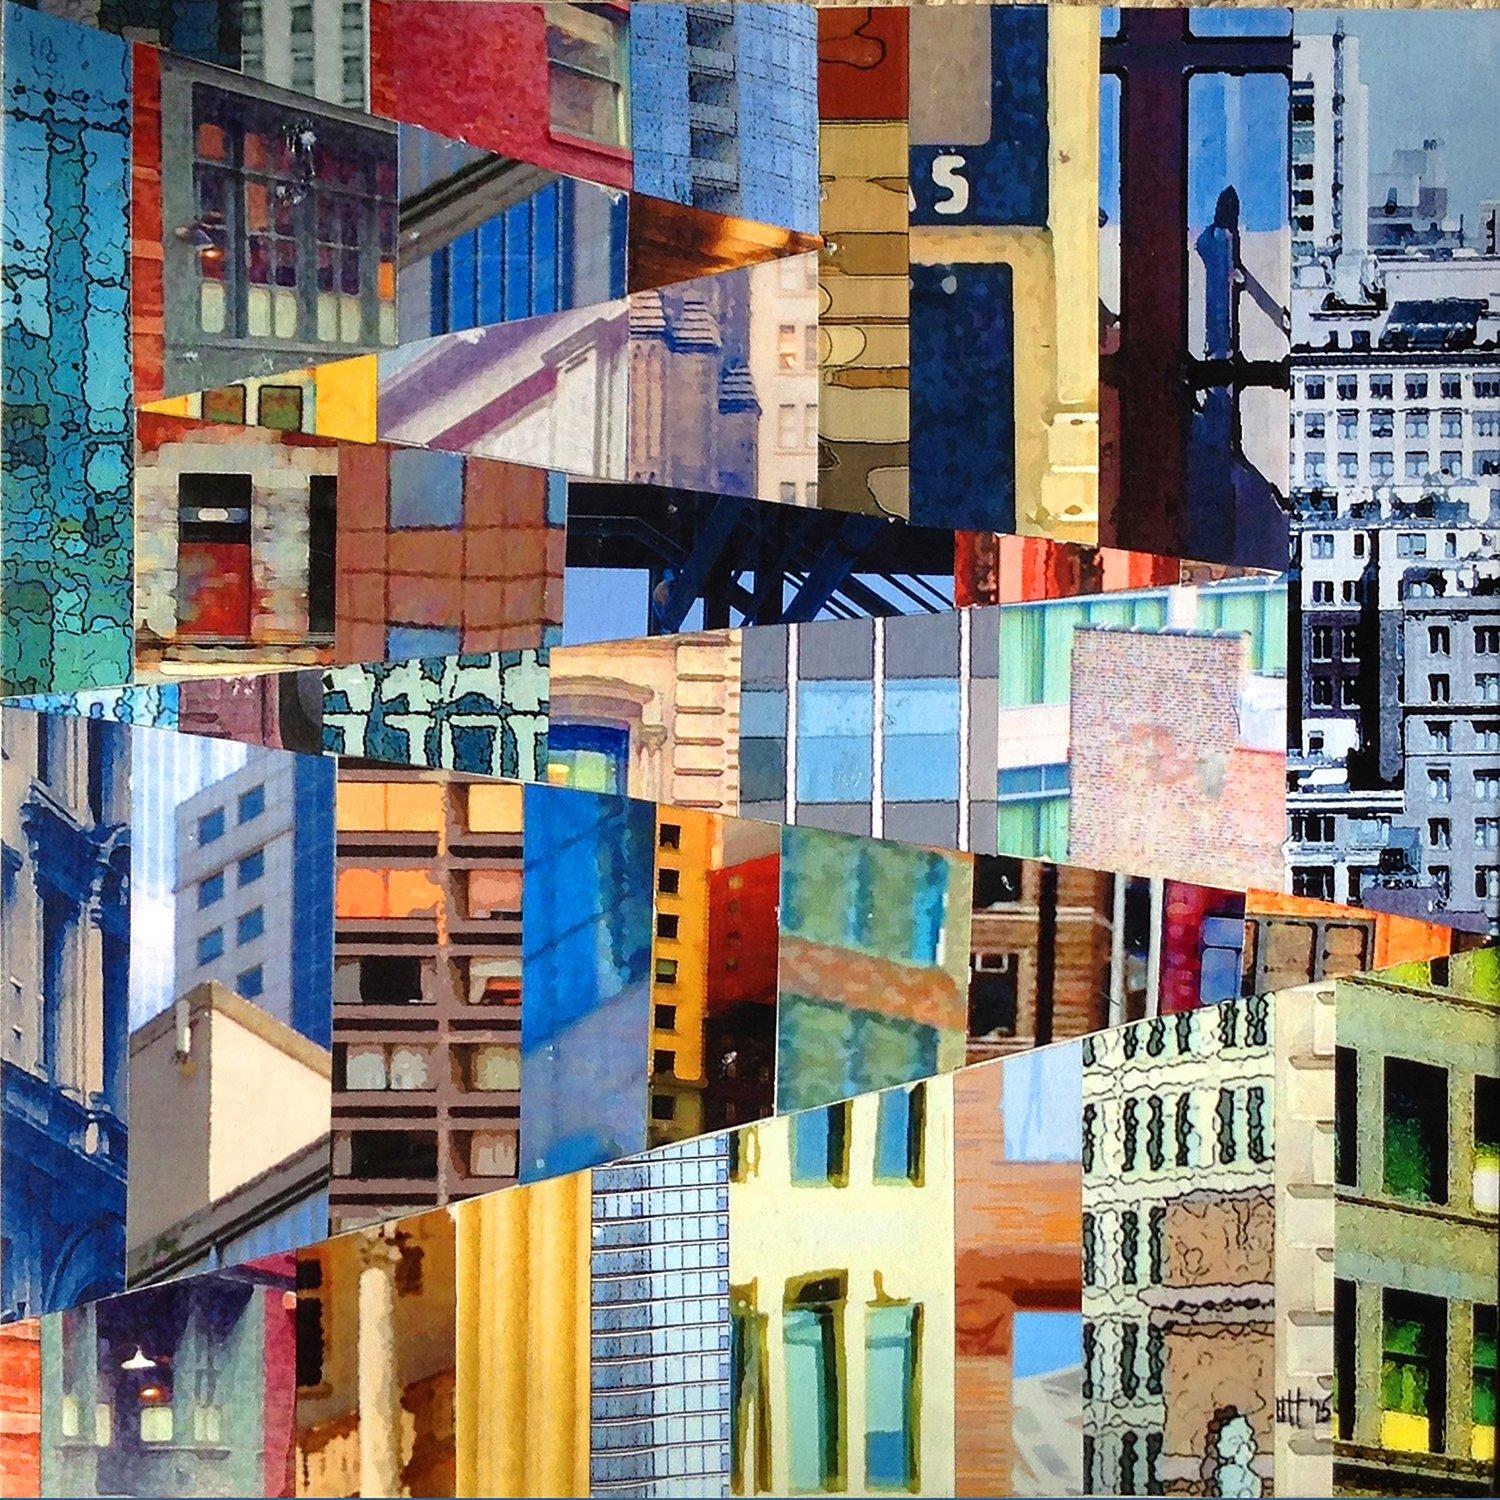 Patchwork City 11, Mixed Media on Wood - Contemporary Mixed Media Art by Marilyn Henrion